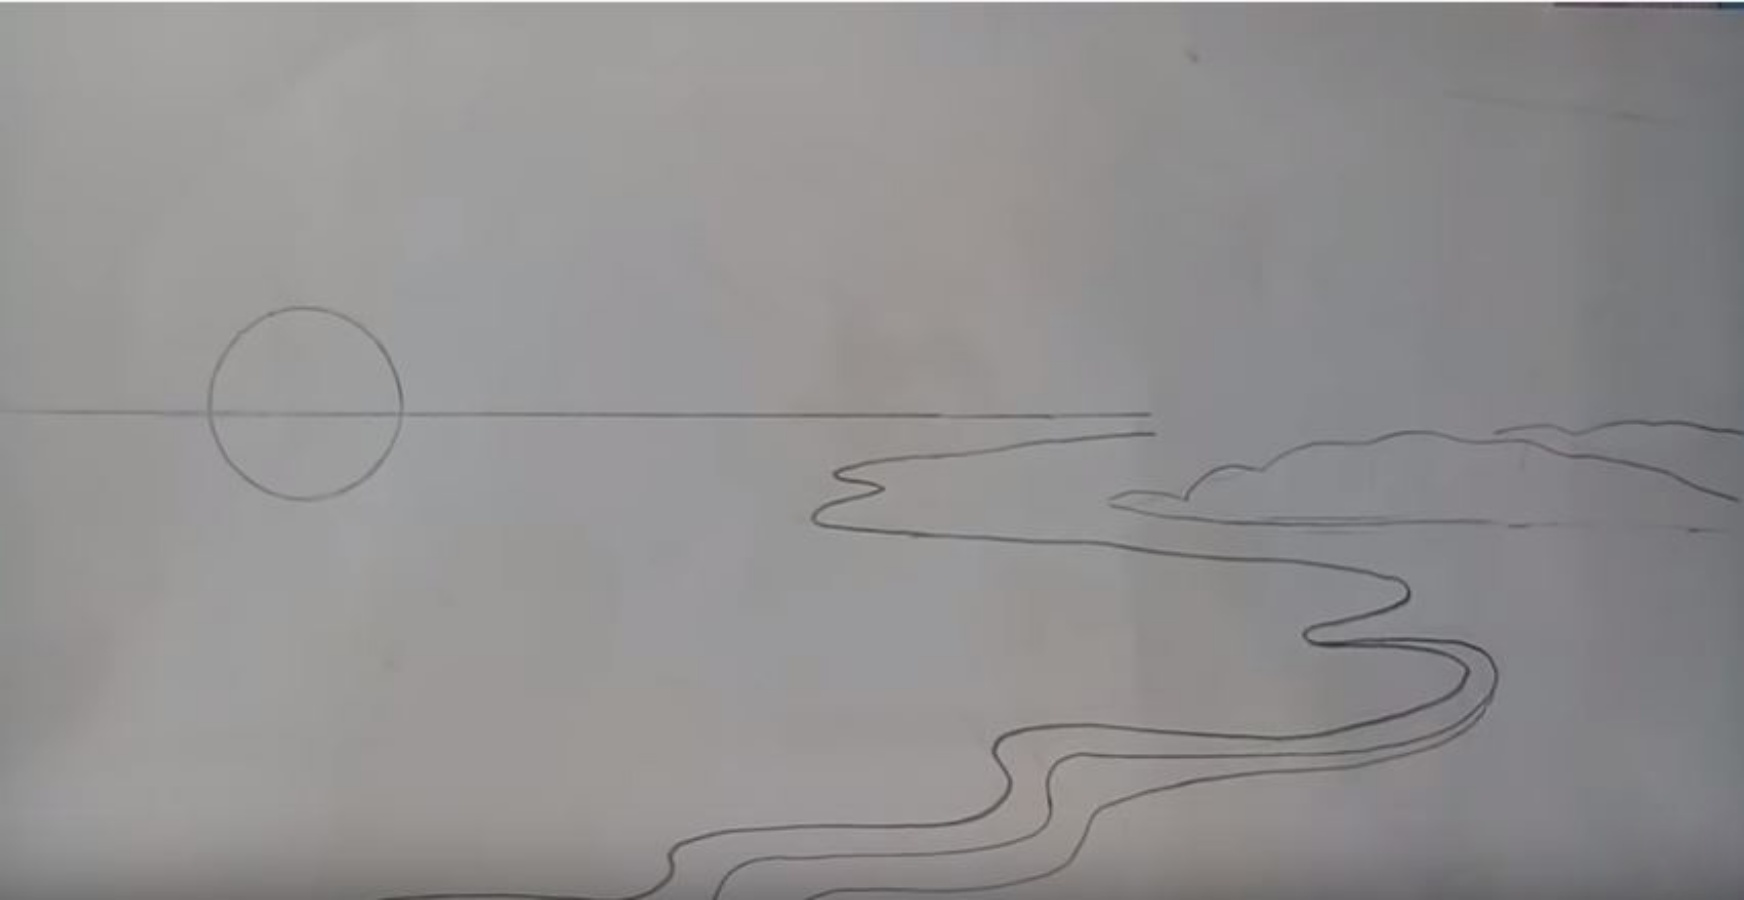 How to draw landscape step by step   YouTube